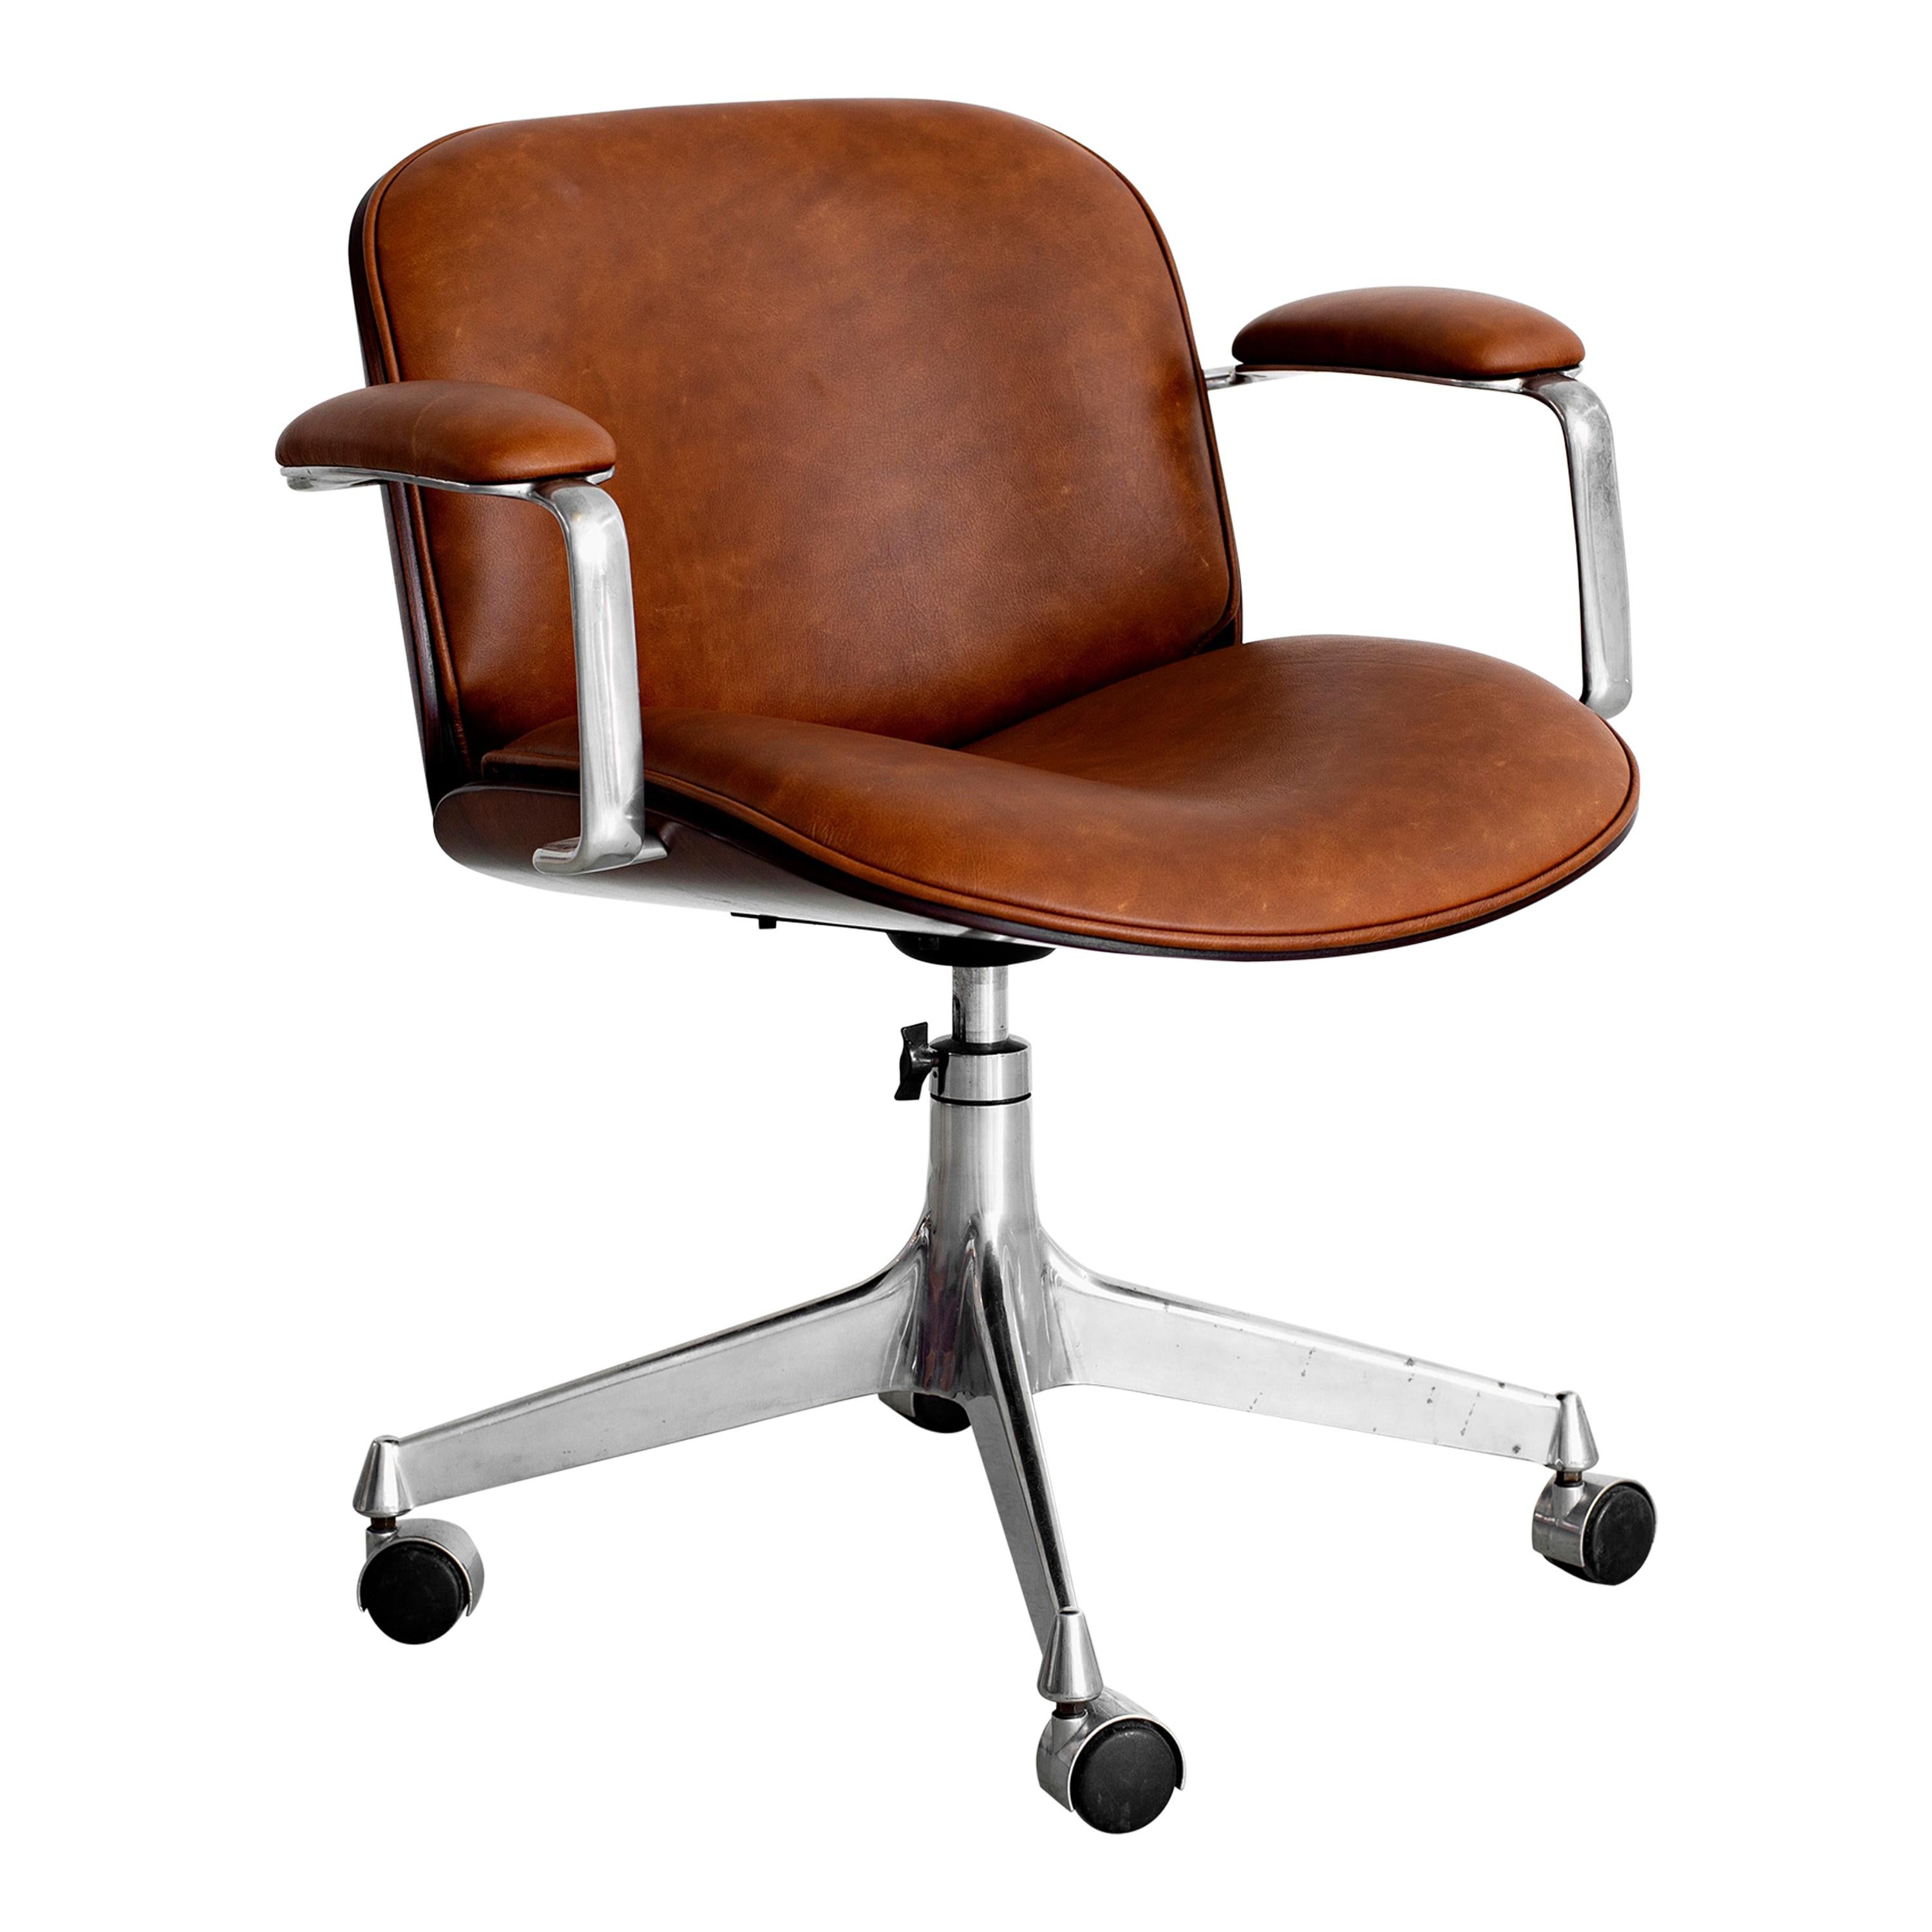 Ico Parisi Office Chair, Brown Leather